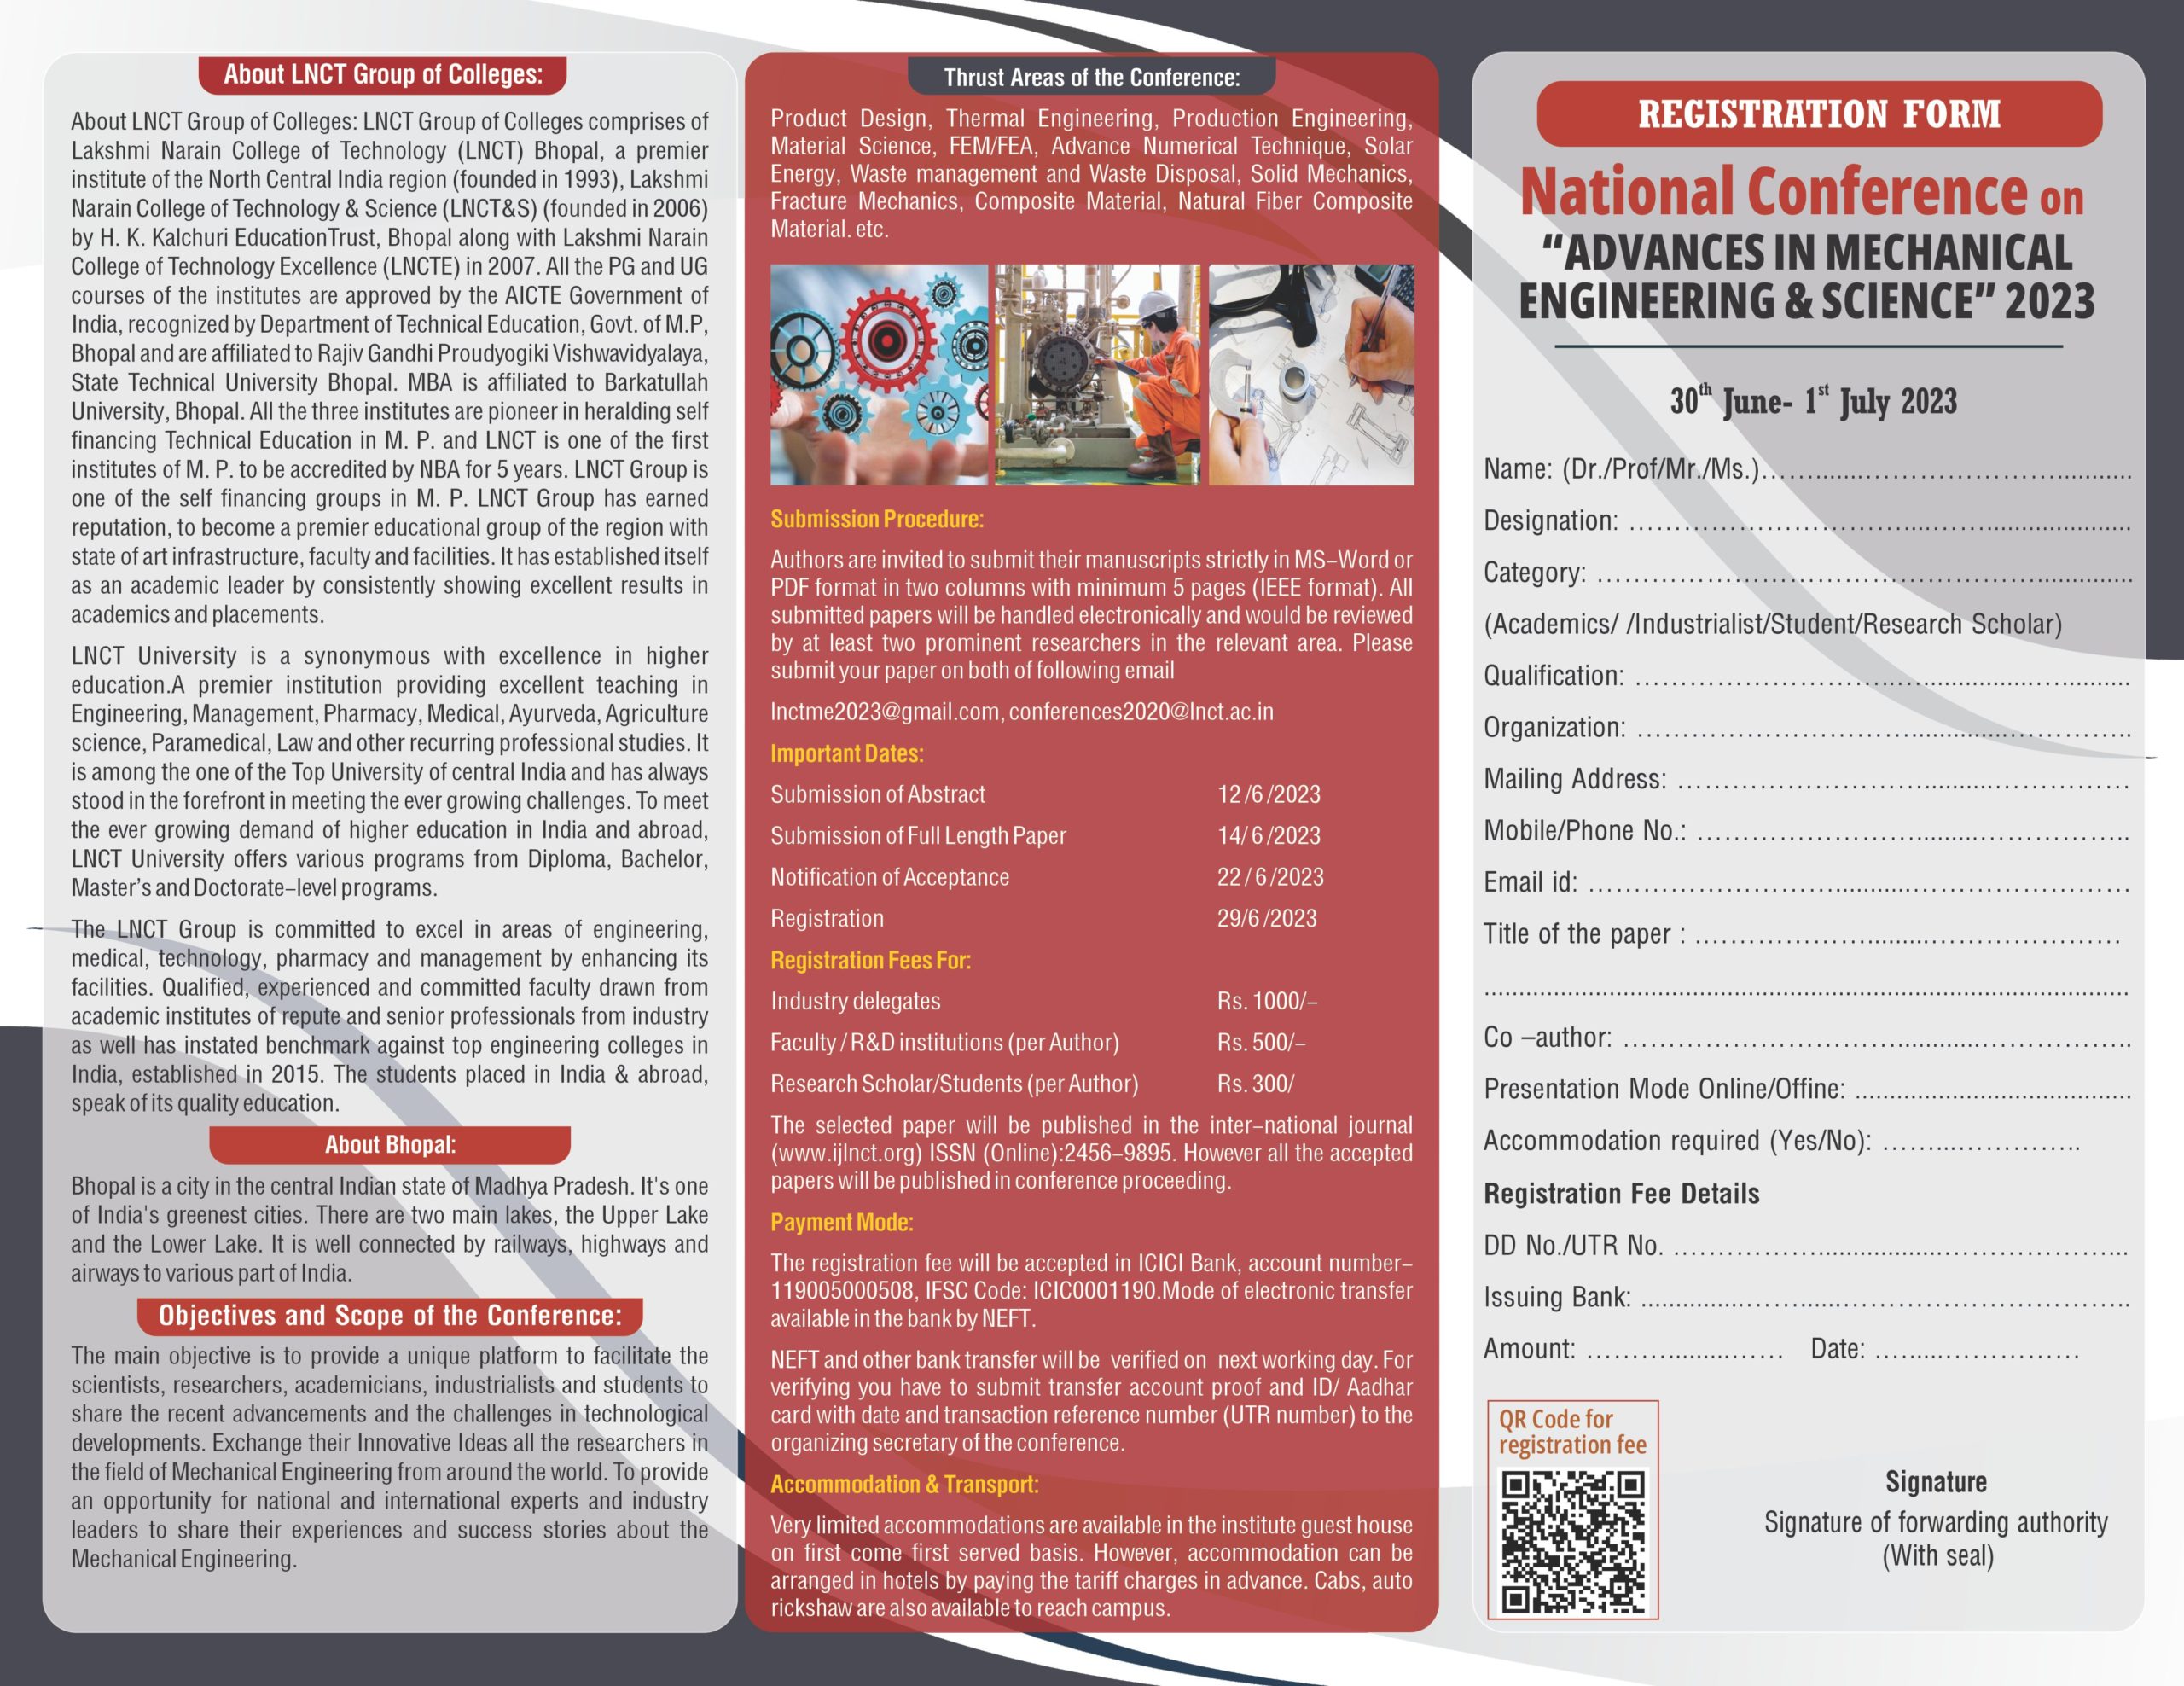 National Conference on Advances in Mechanical Engineering & Science 8